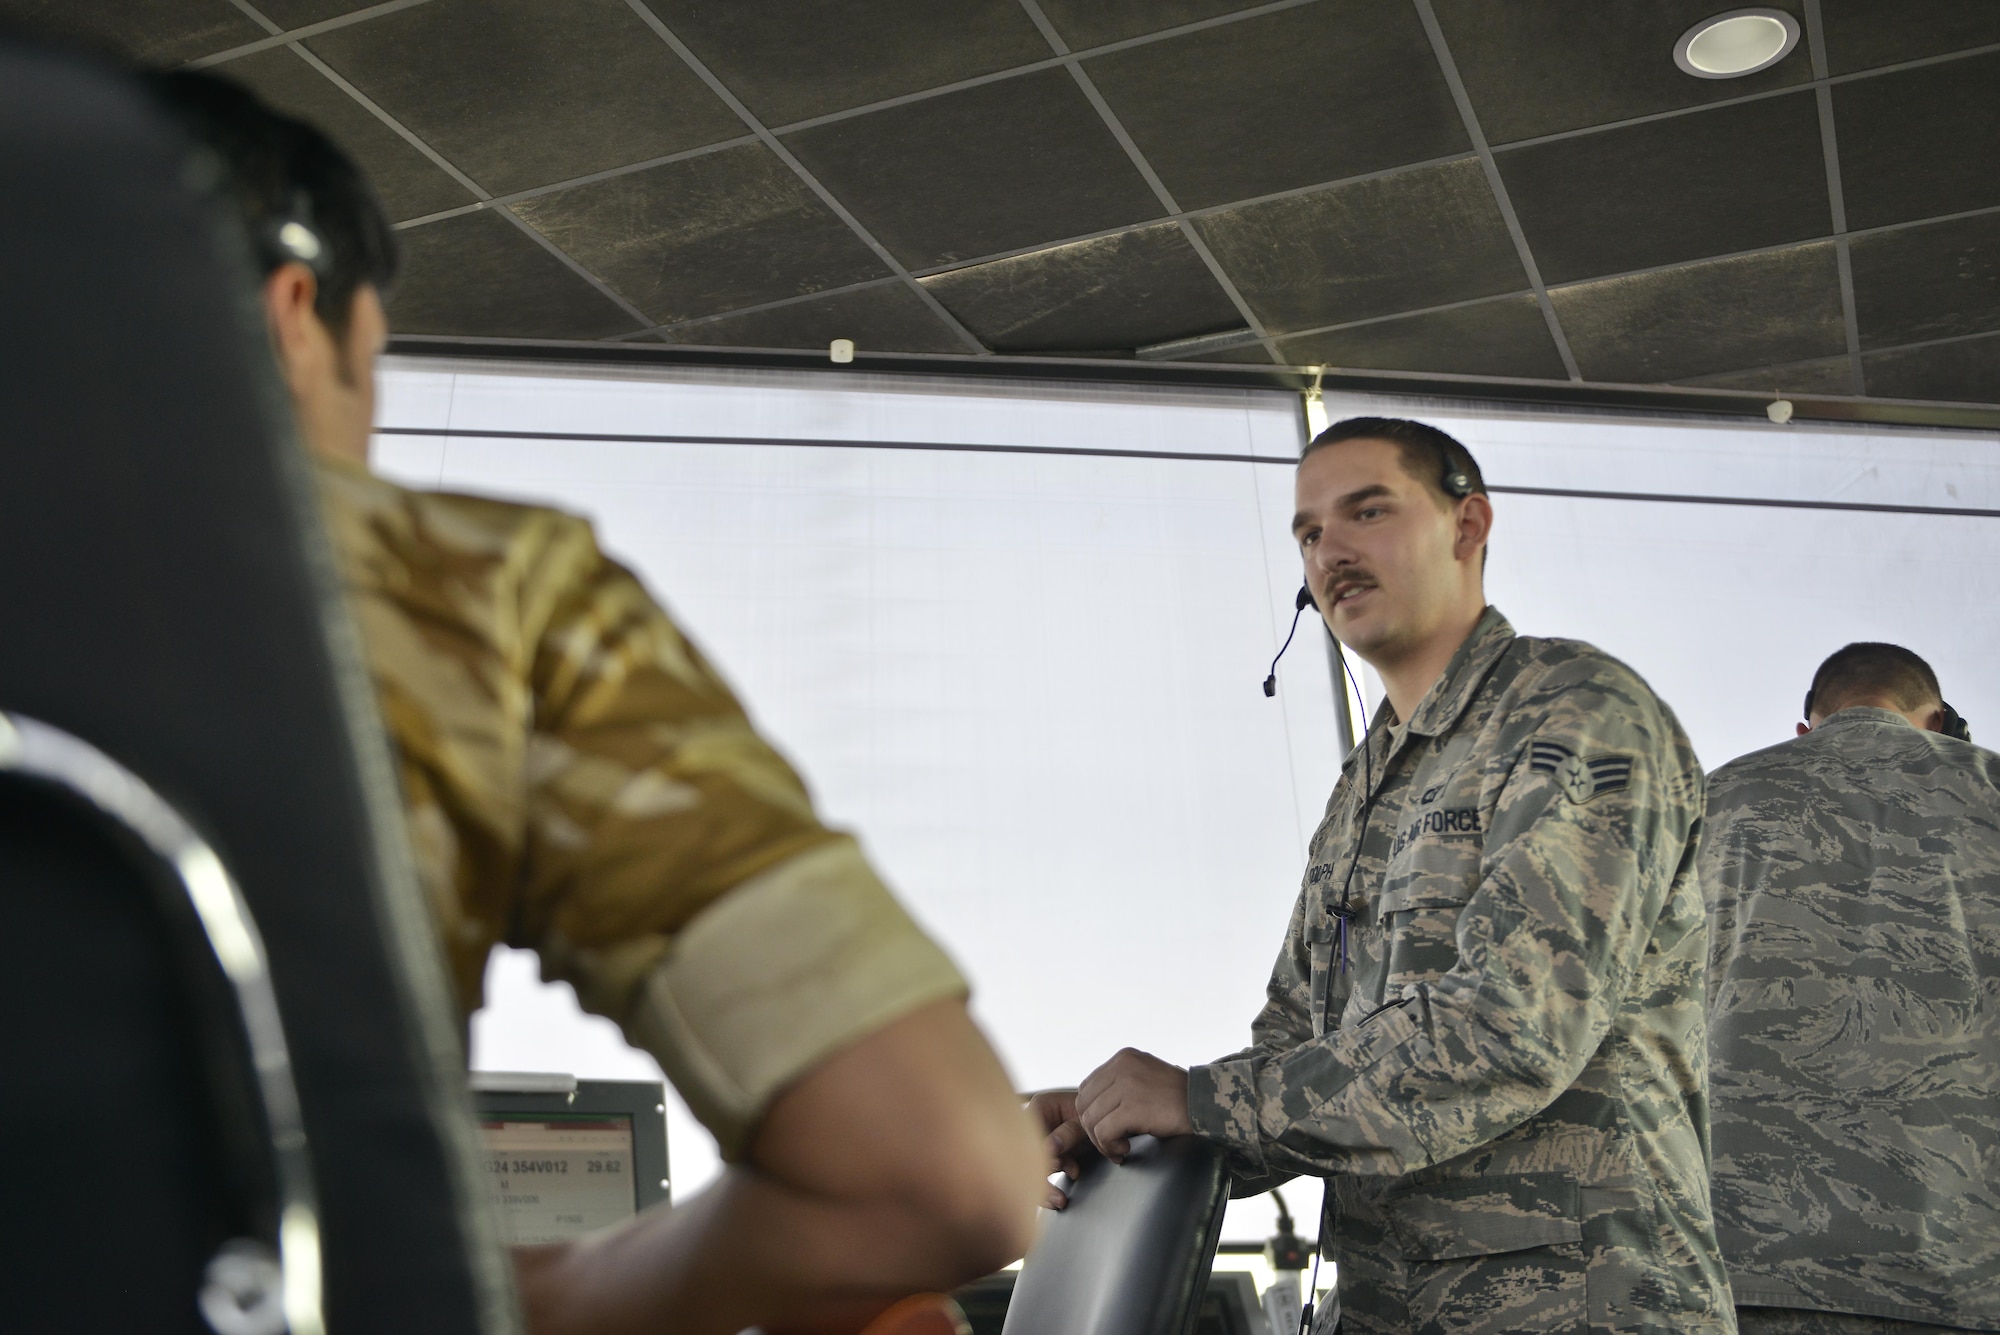 Senior Airman Nicholas Randolph, 379th Expeditionary Operations Support Squadron air traffic controller, coordinates with Qatari military ATC before advising aircraft of the takeoff line-up September 2, 2015 at Al Udeid Air Base, Qatar. Airmen of the 379th EOSS ATC work closely with Qatari military ATC in conducting airfield operations to support coalition forces deployed here in support of Operation Inherent Resolve and Operation Freedom’s Sentinel. (U.S. Air Force photo/Staff Sgt. Alexandre Montes)